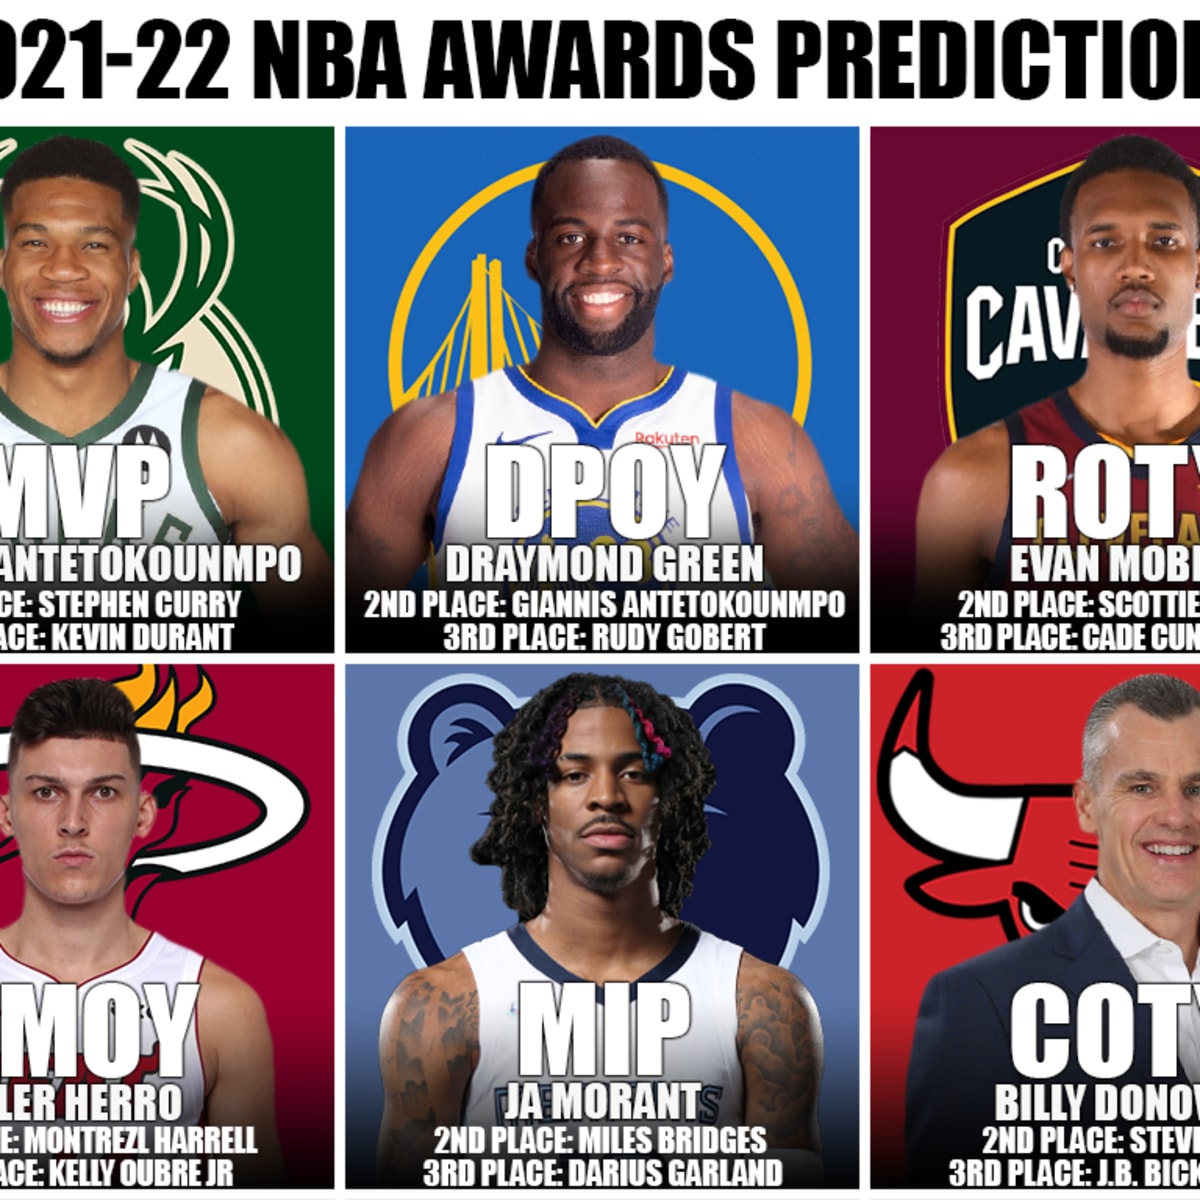 2021-22 NBA MVP Race: Stephen Curry holds steady at No. 1